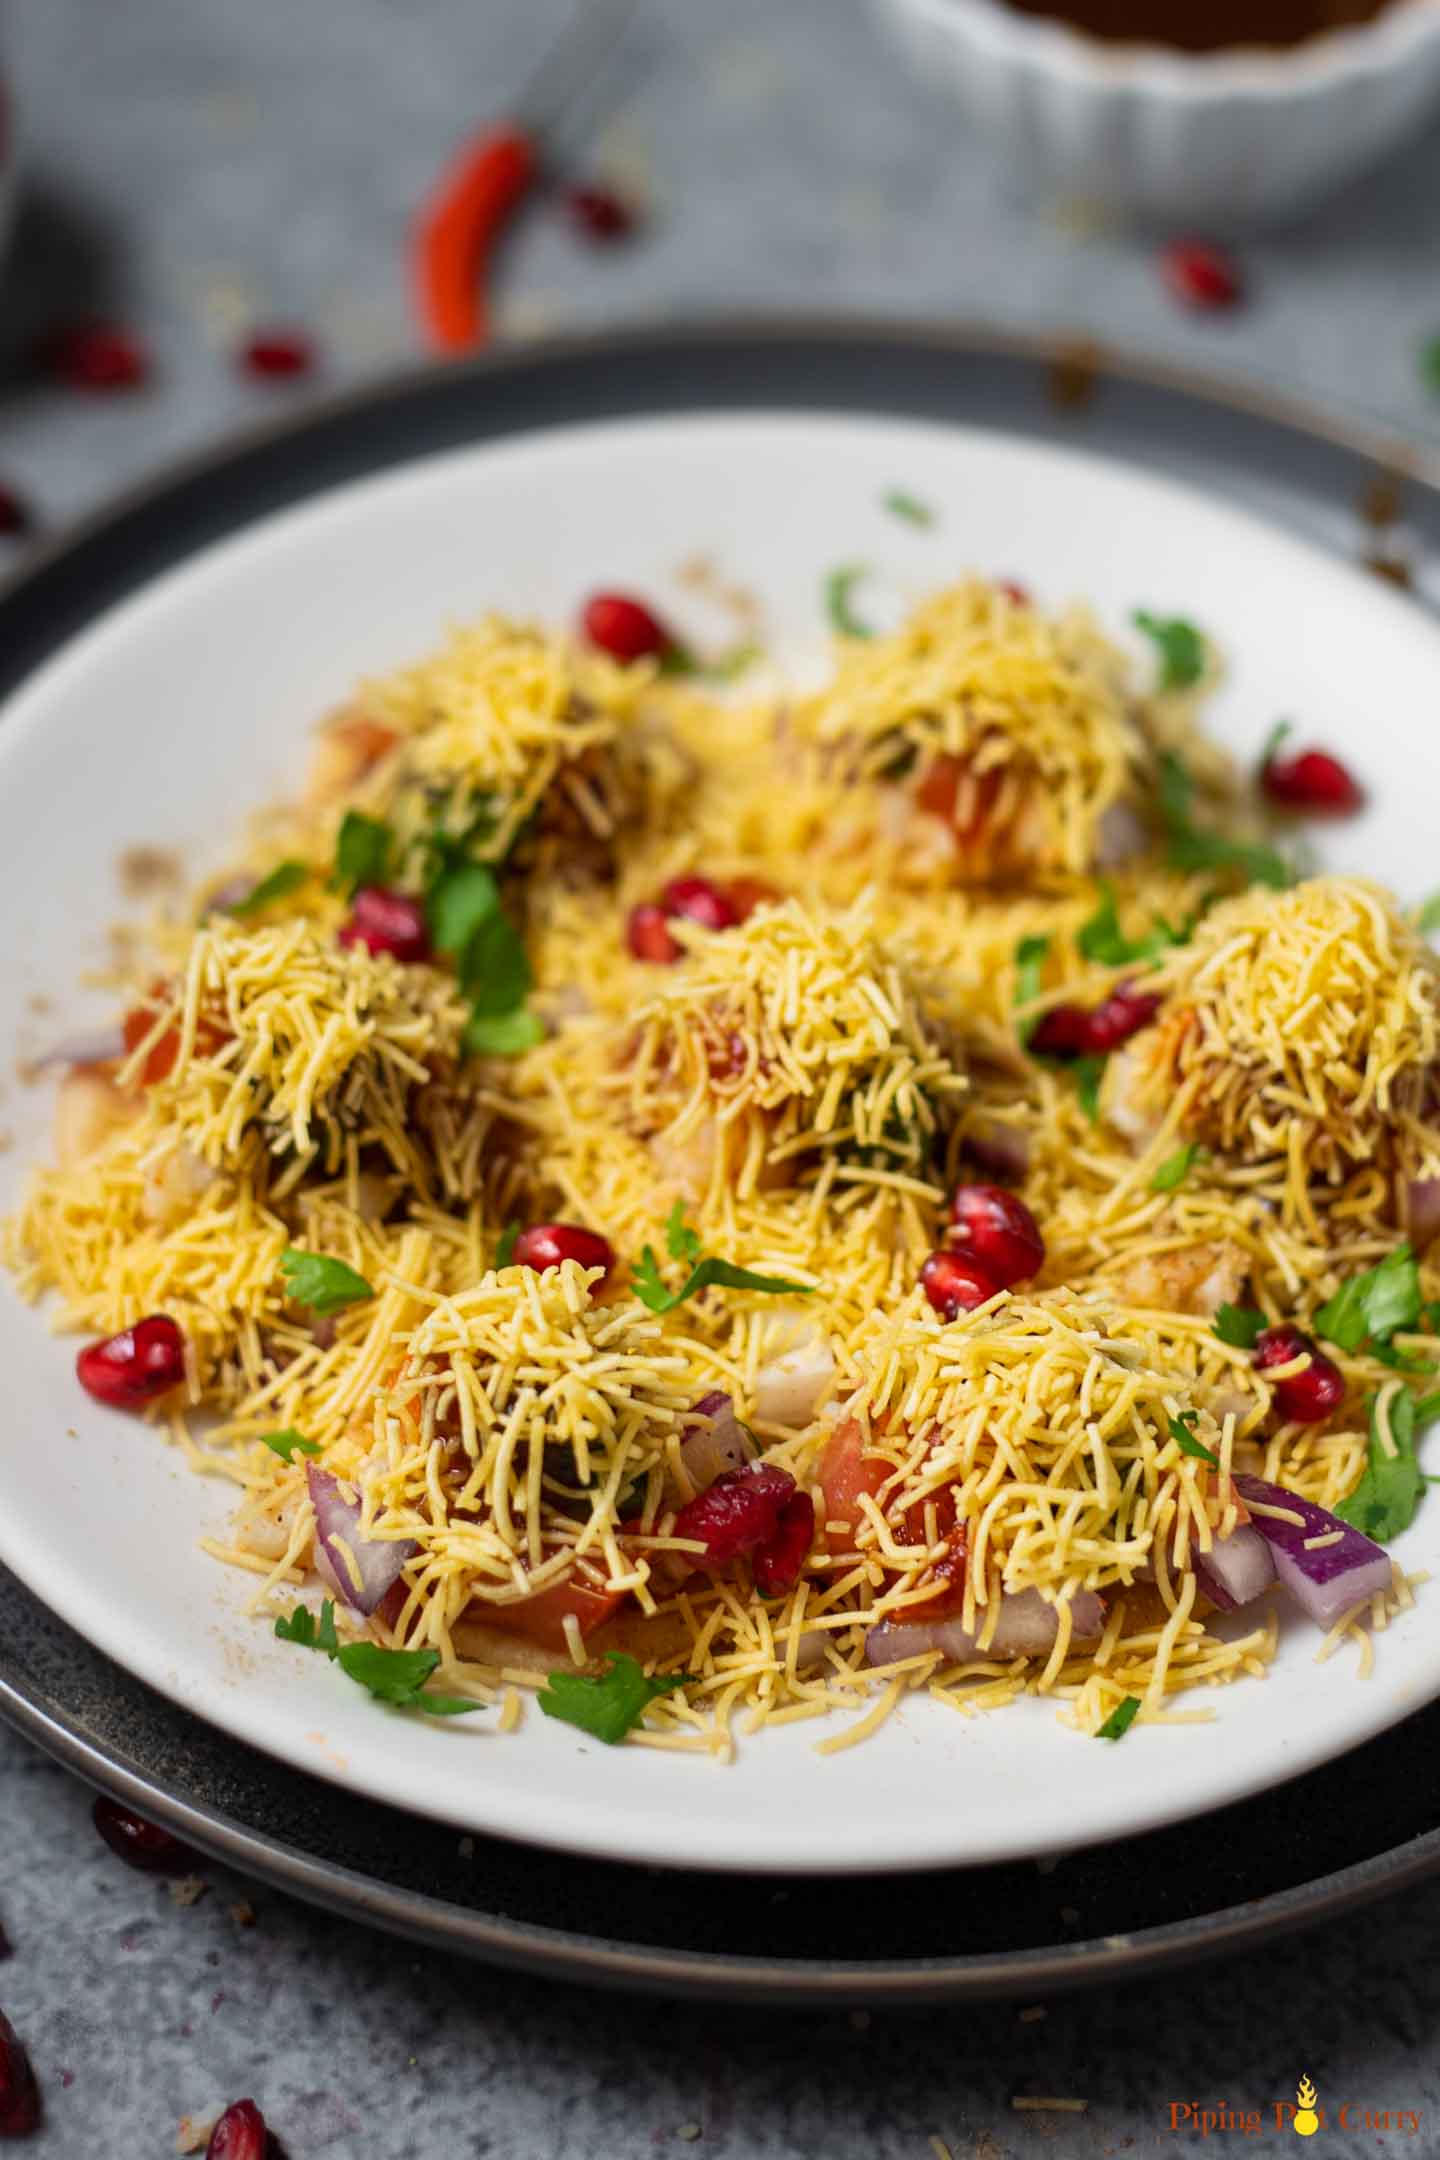 Sev puri garnished with cilantro and pomegranate seeds on a white plate